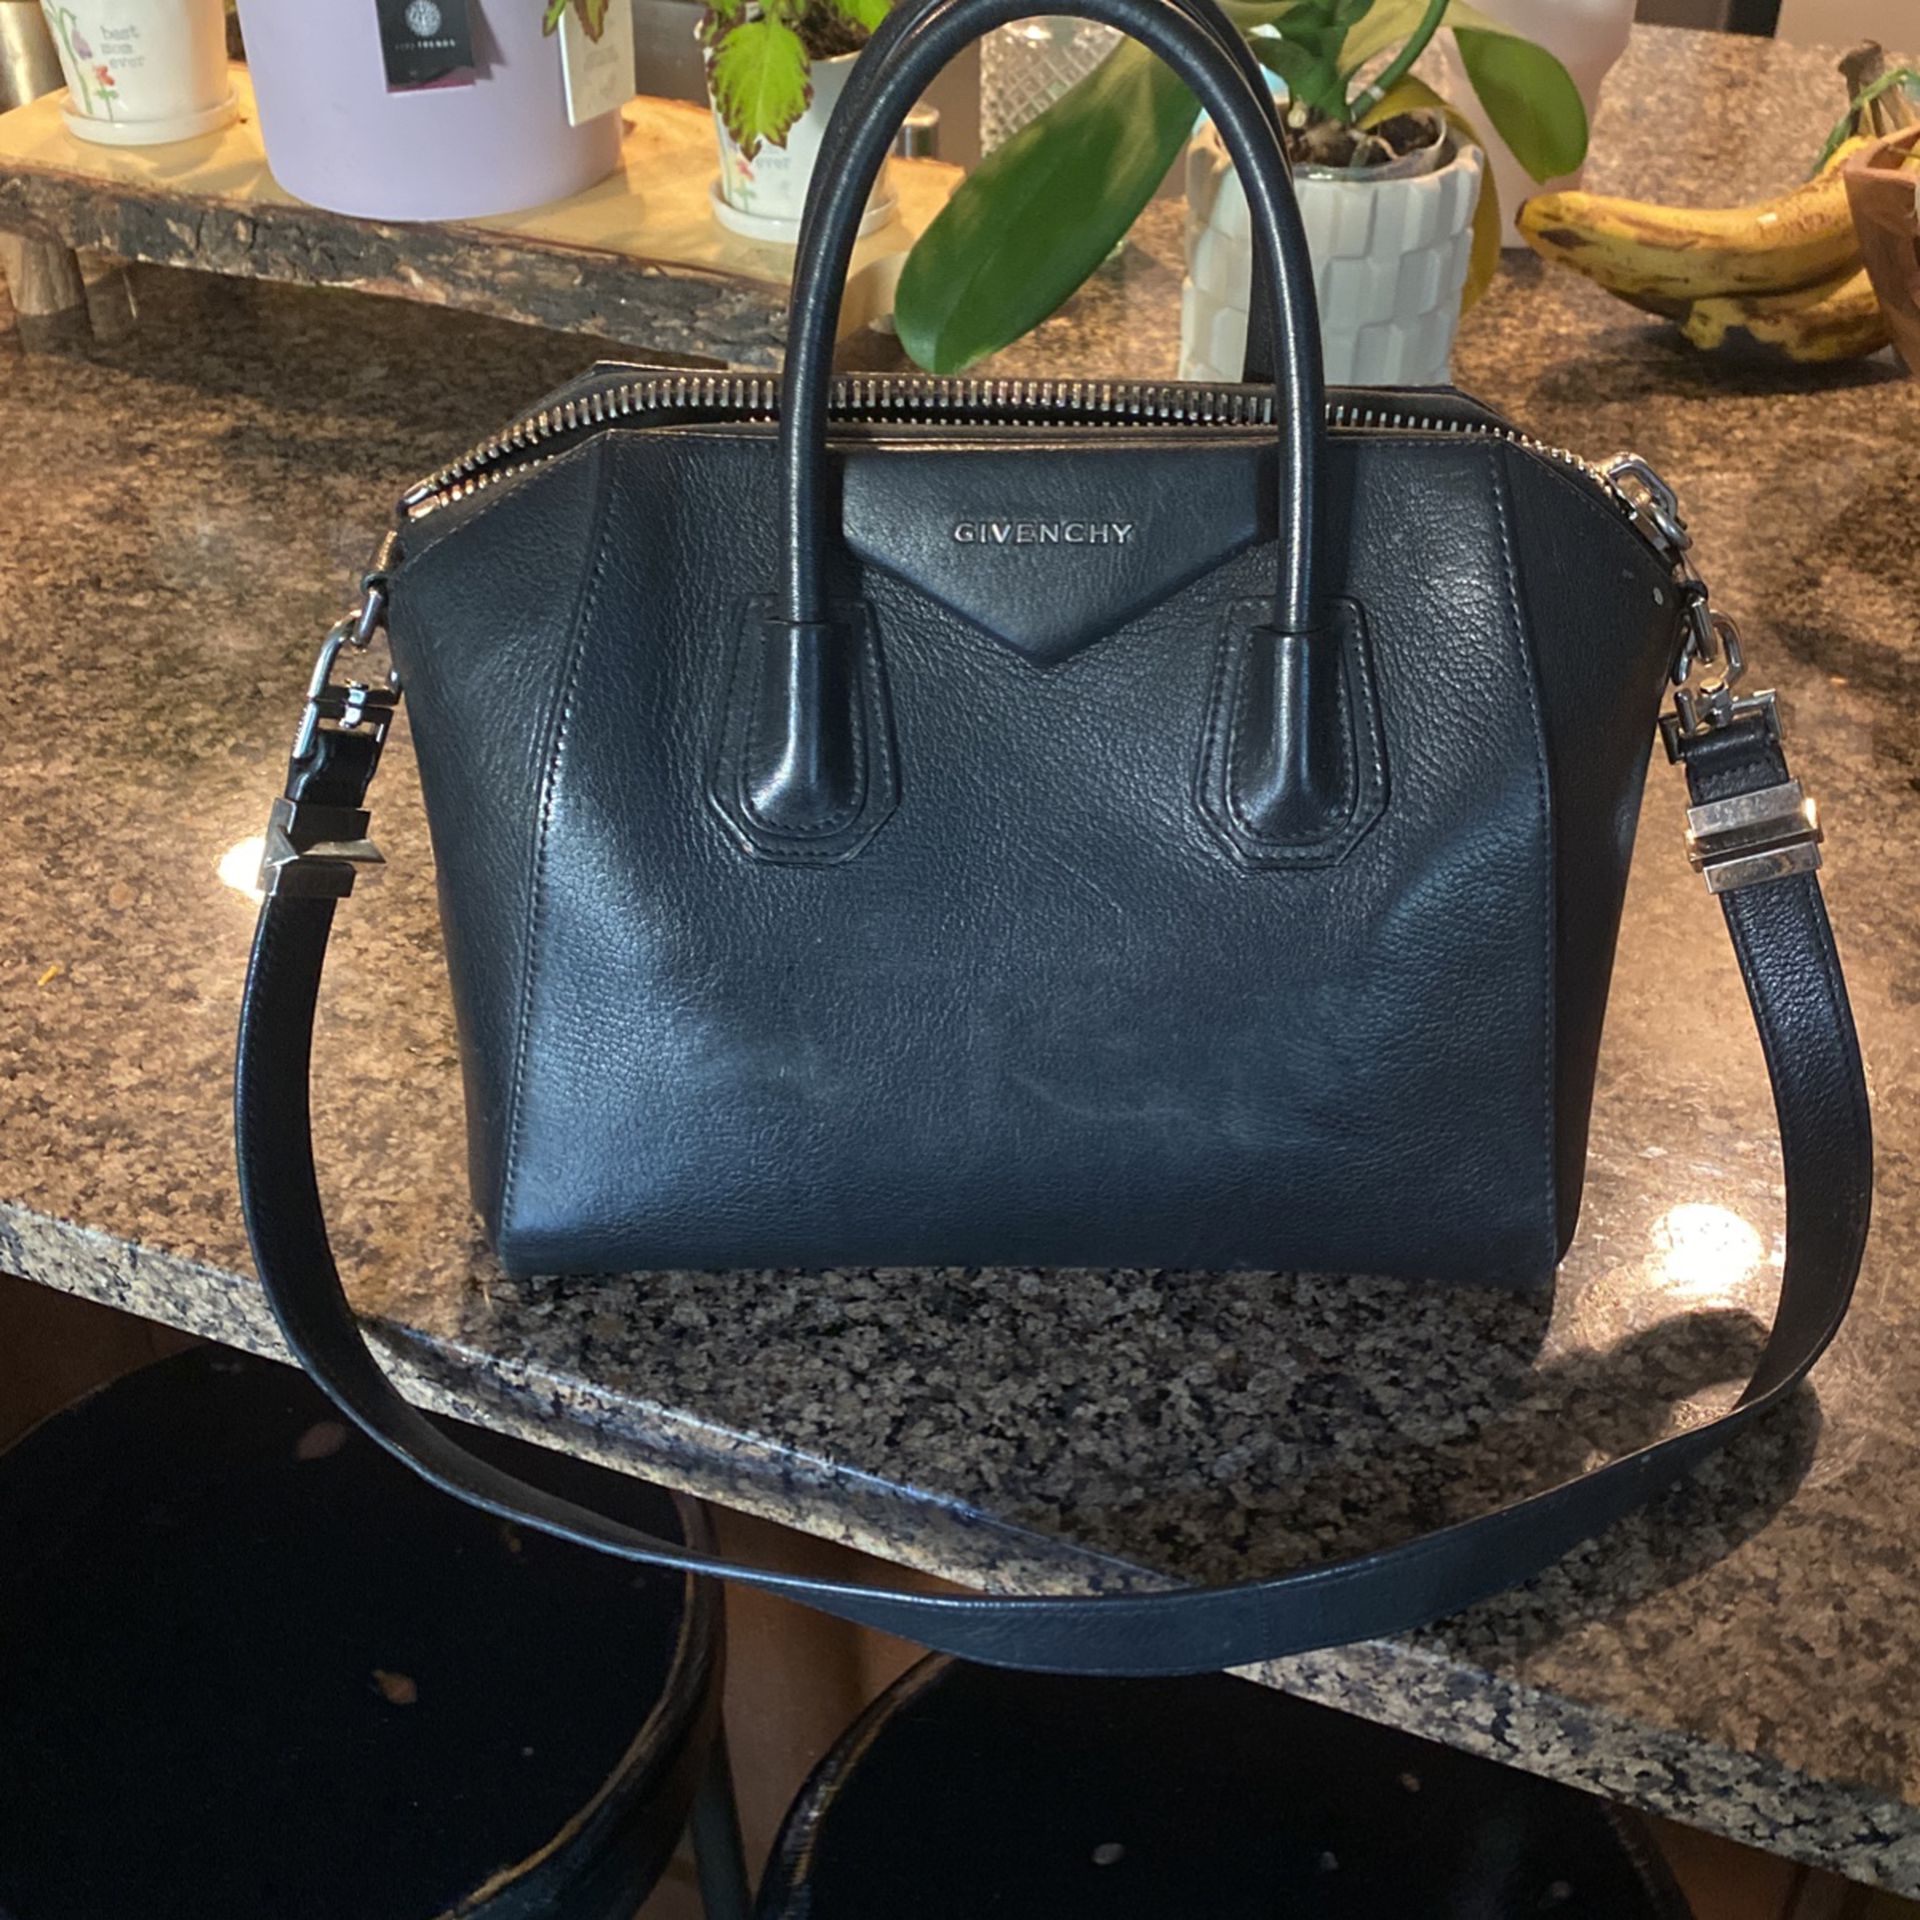 Givenchy Handbag for Sale in Edgewood, WA - OfferUp